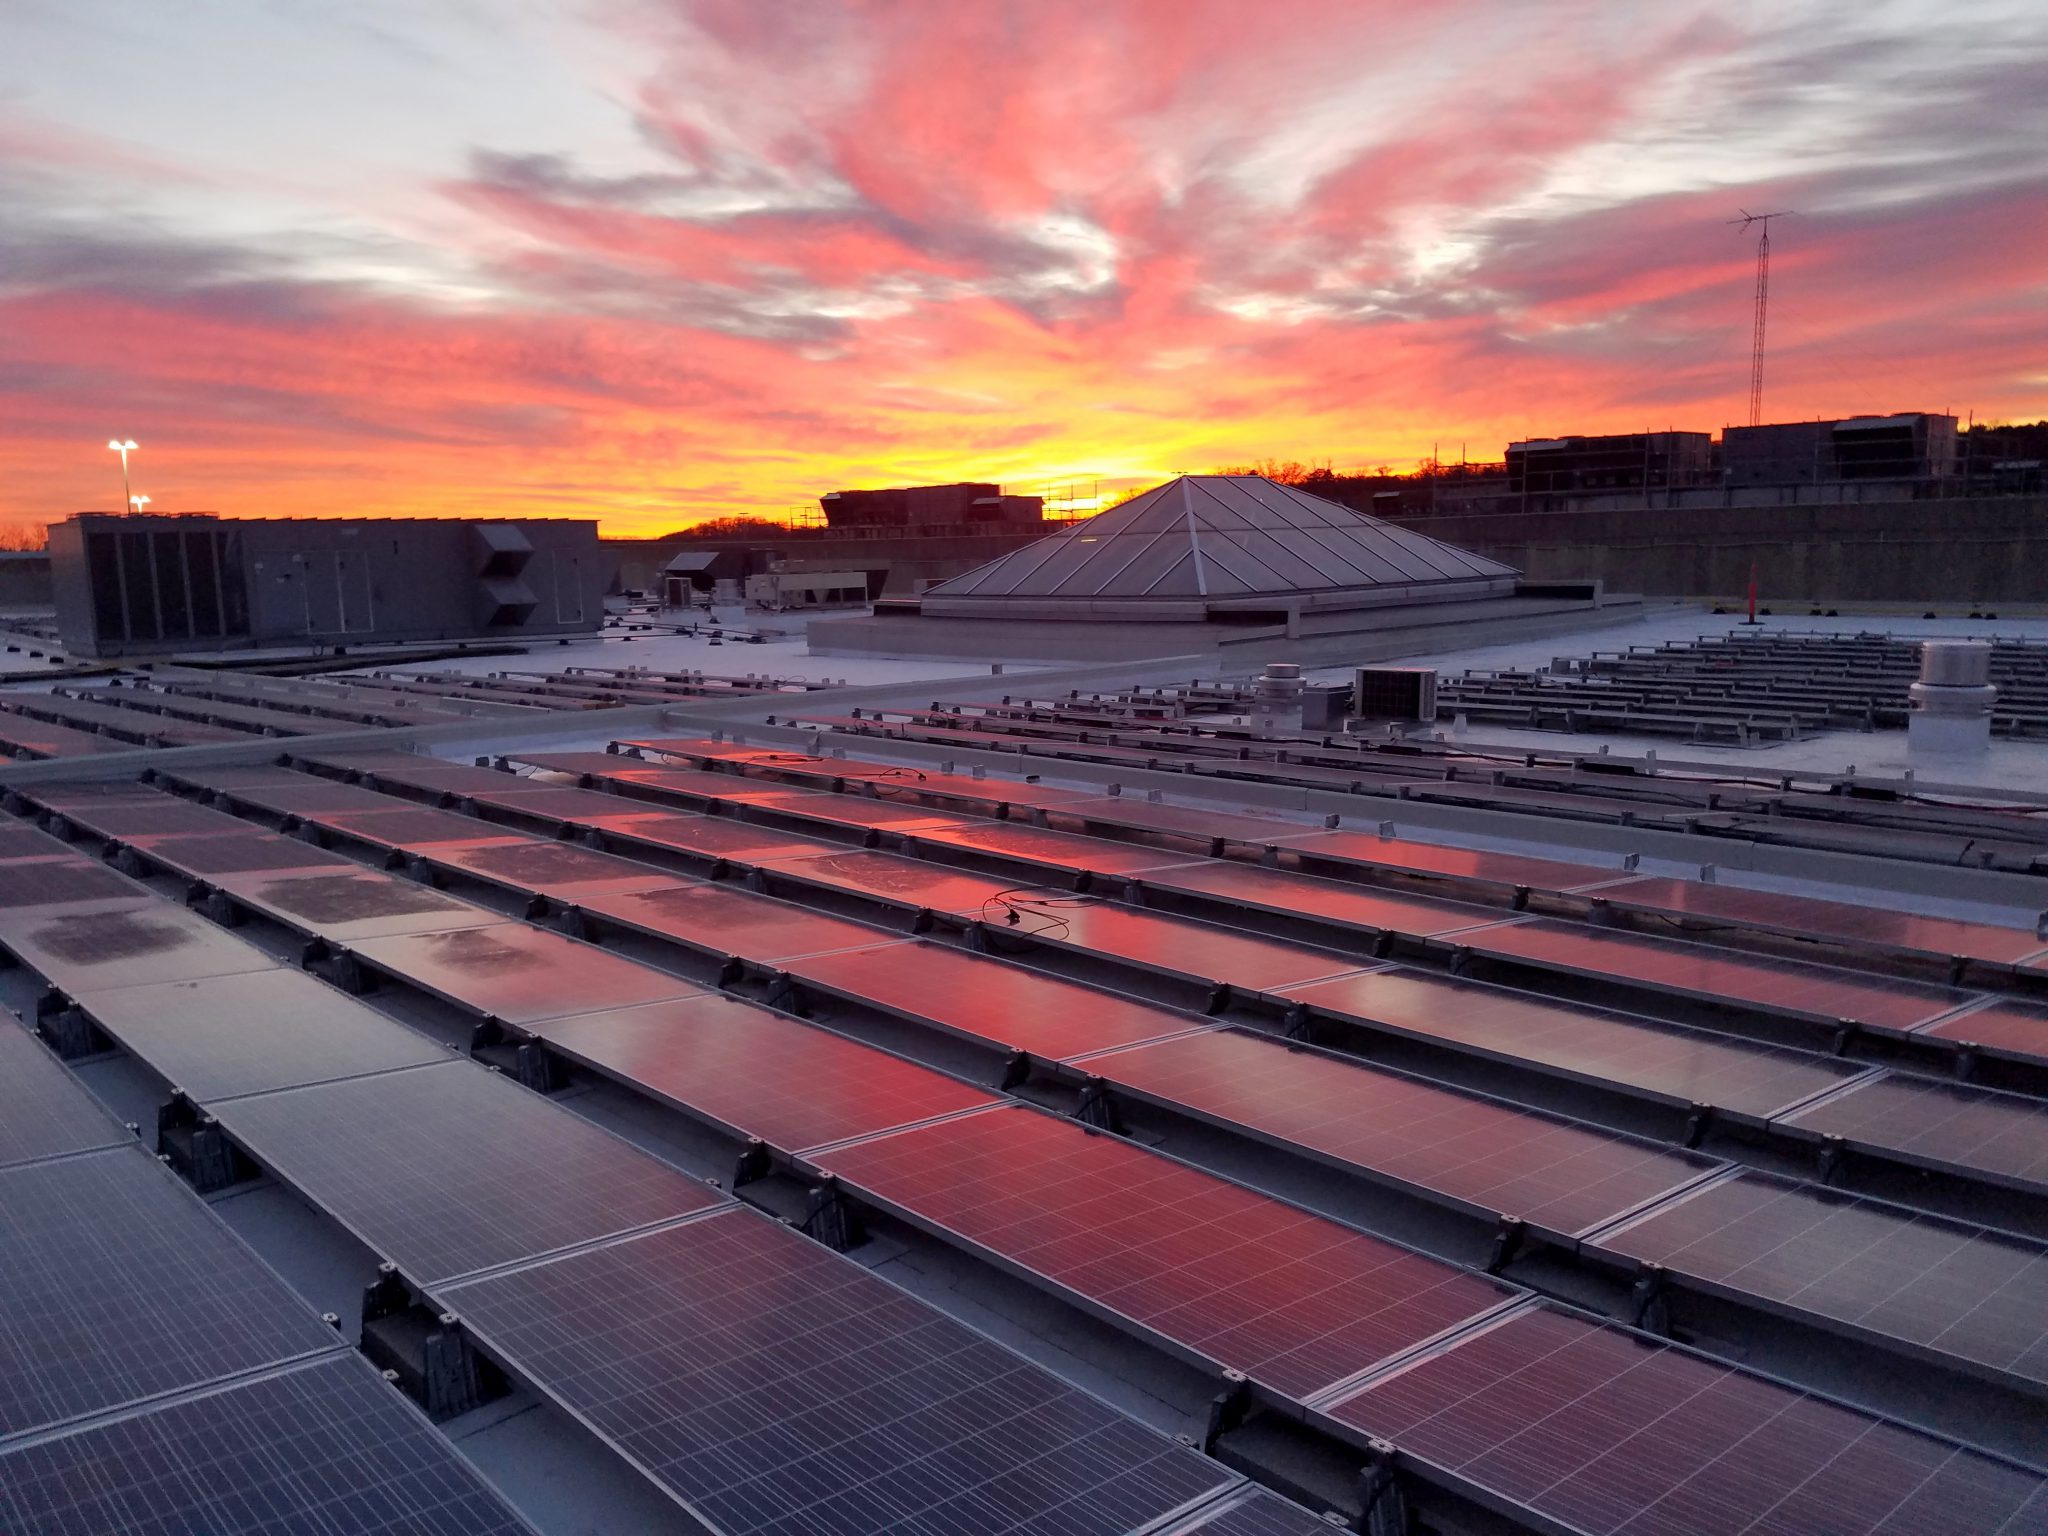 Standard Solar acquires 21MW community solar projects in two US states